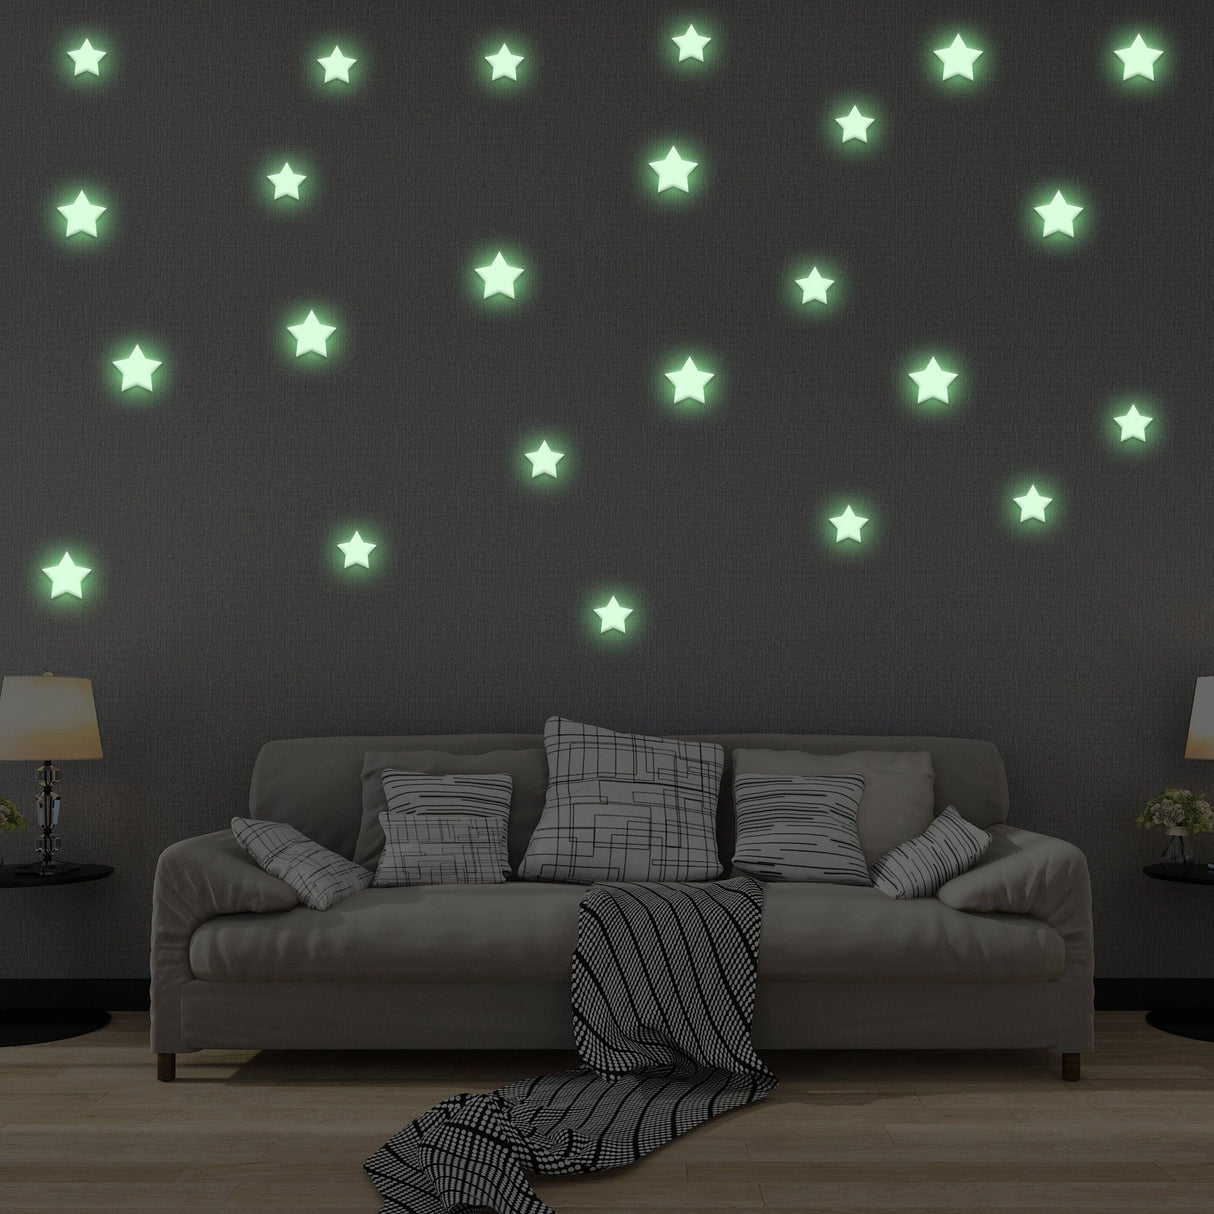 Ultra Bright Glow in the Dark Ceiling Stars extra Bright Small Stickers to  Make a Realistic Starry Outer Space Wall or Ceiling 